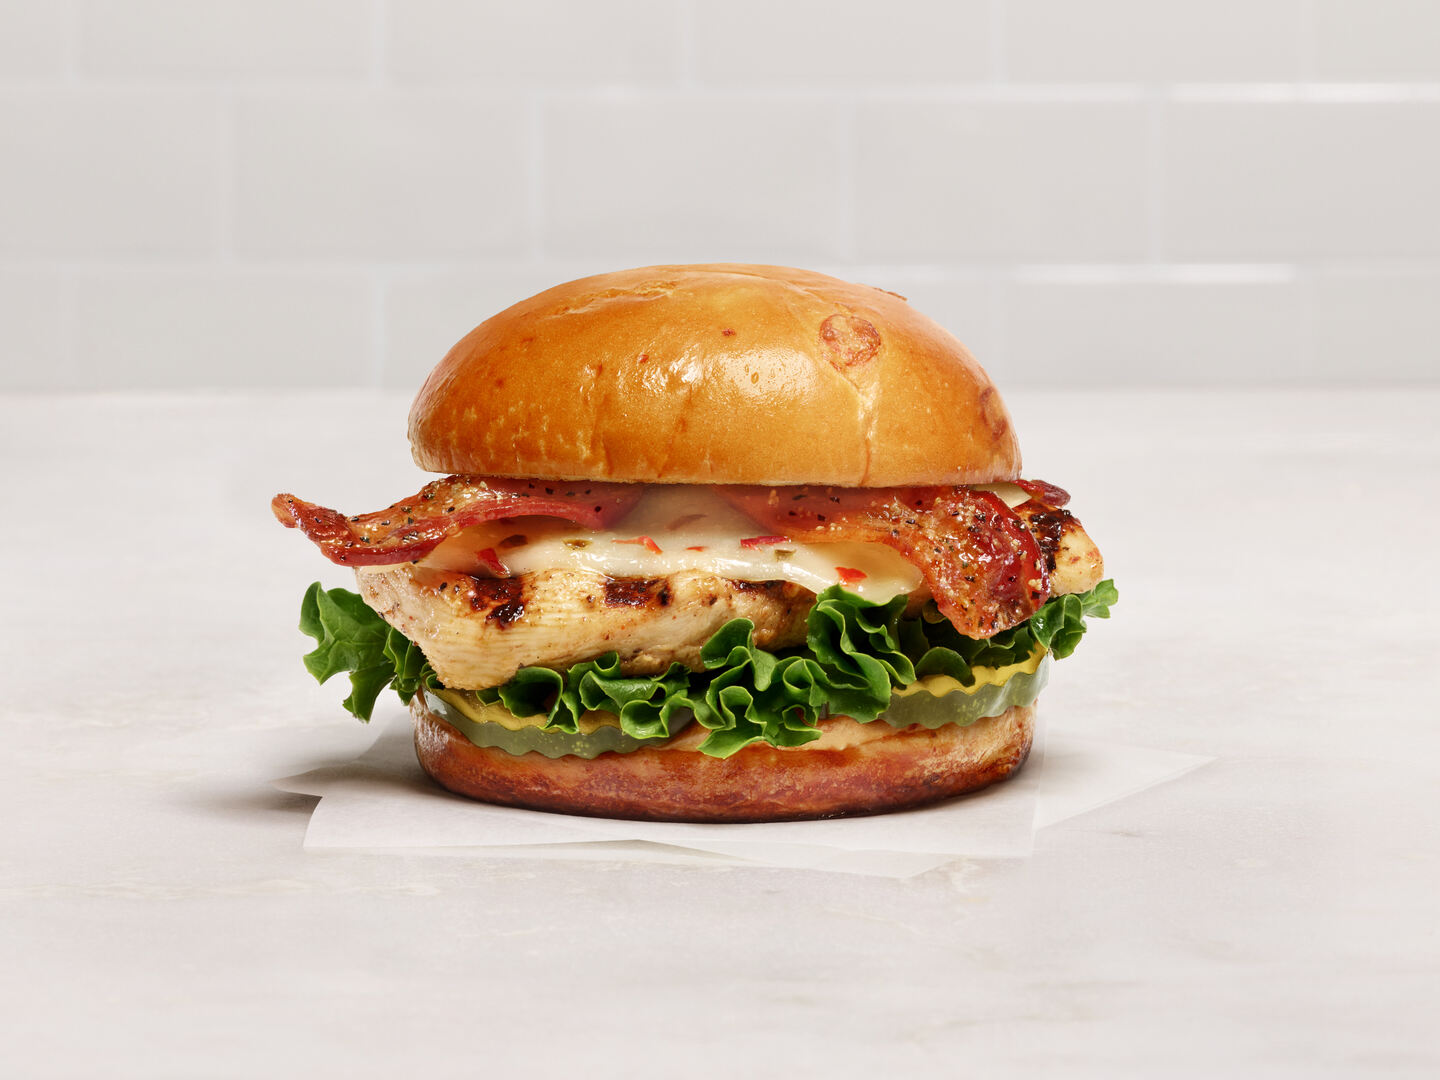 The new Chick-fil-A Maple Pepper Bacon Sandwich on a white countertop.